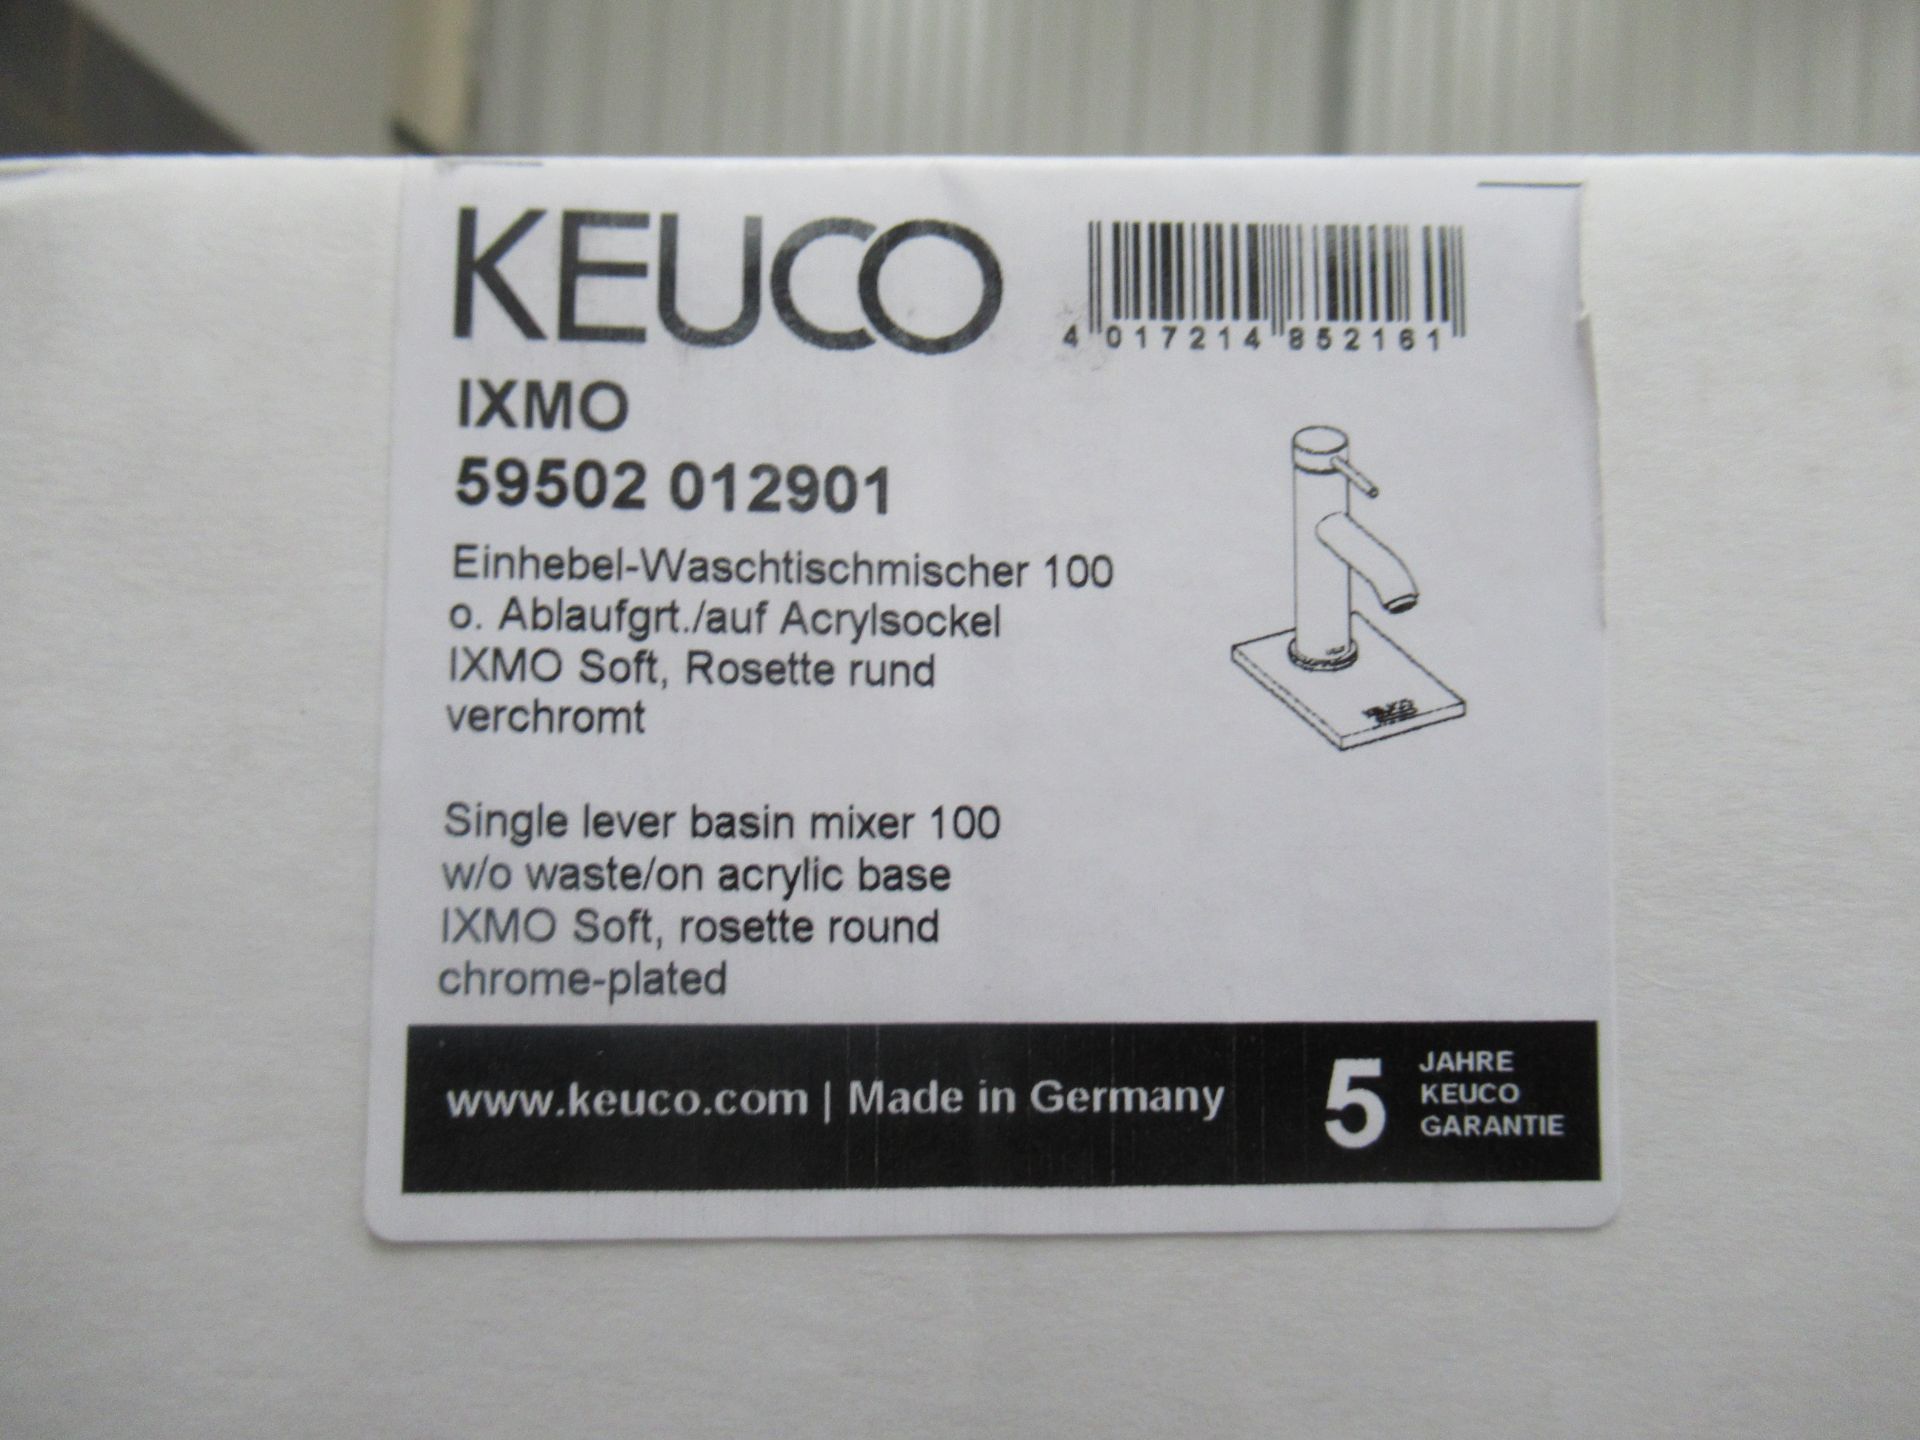 A Keuco IXMO Single Lever Basin Mixer 100-Tap, Chrome Plated, P/N 59502-012901 - Image 2 of 3